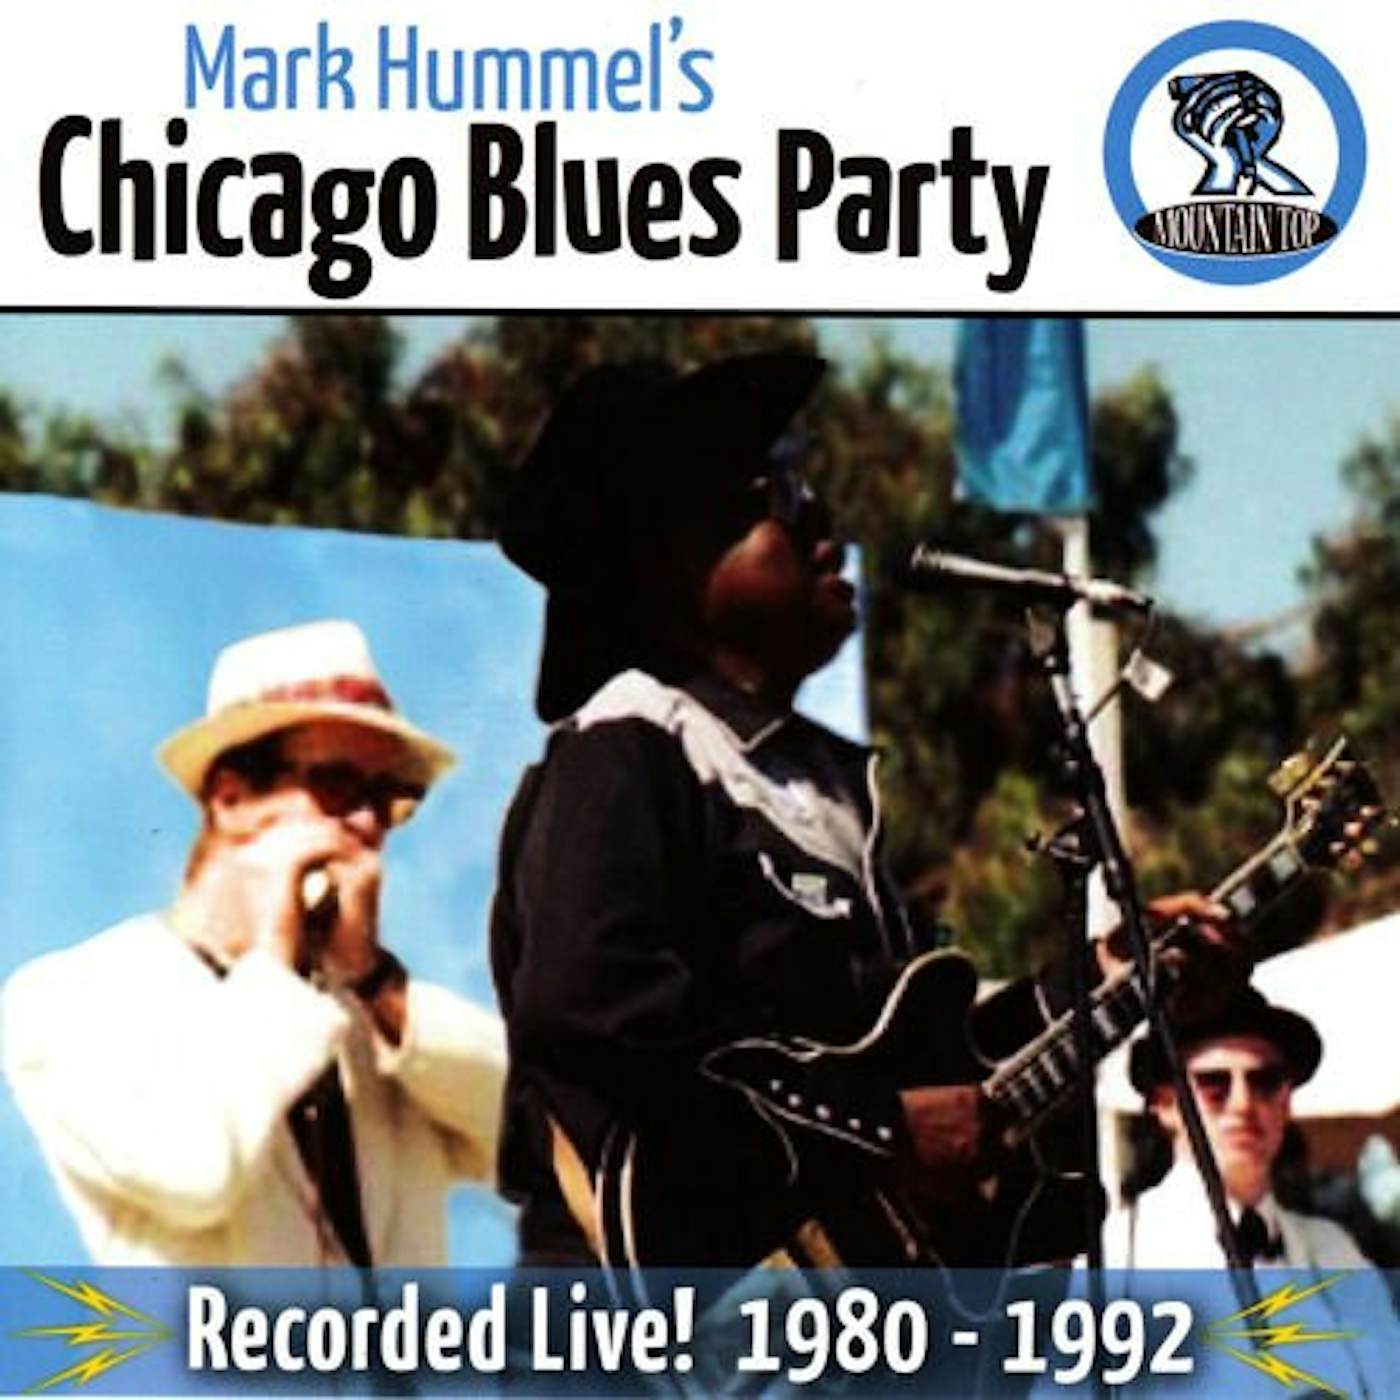 MARK HUMMEL'S CHICAGO BLUES PARTY RECORDED LIVE CD